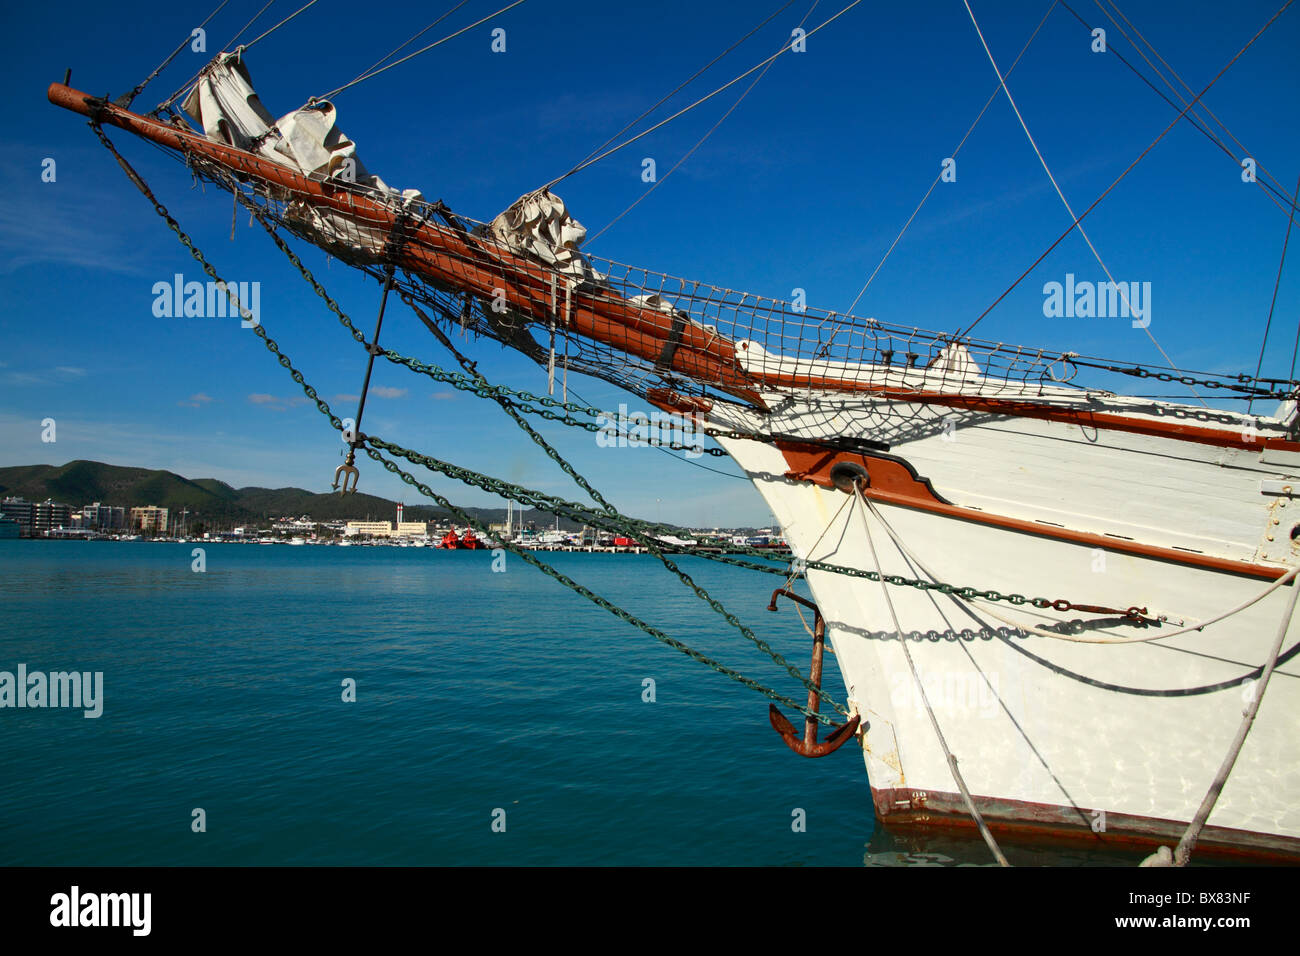 Schooner (Tall Ship) bow and boom detail Stock Photo